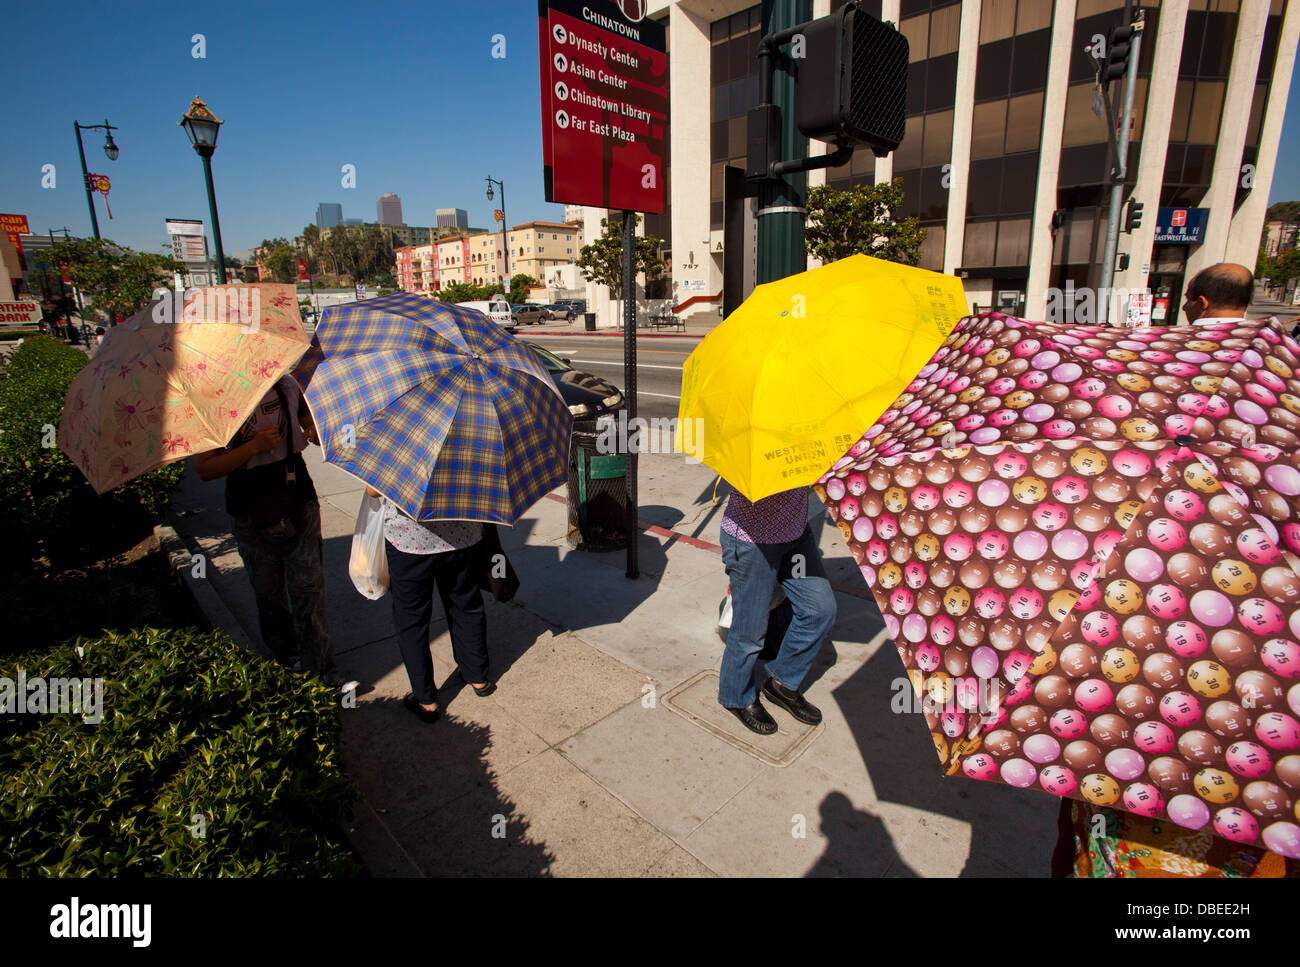 Record breaking heat in Chinatown. Women use umbrellas for shade. Los Angeles, California Stock Photo